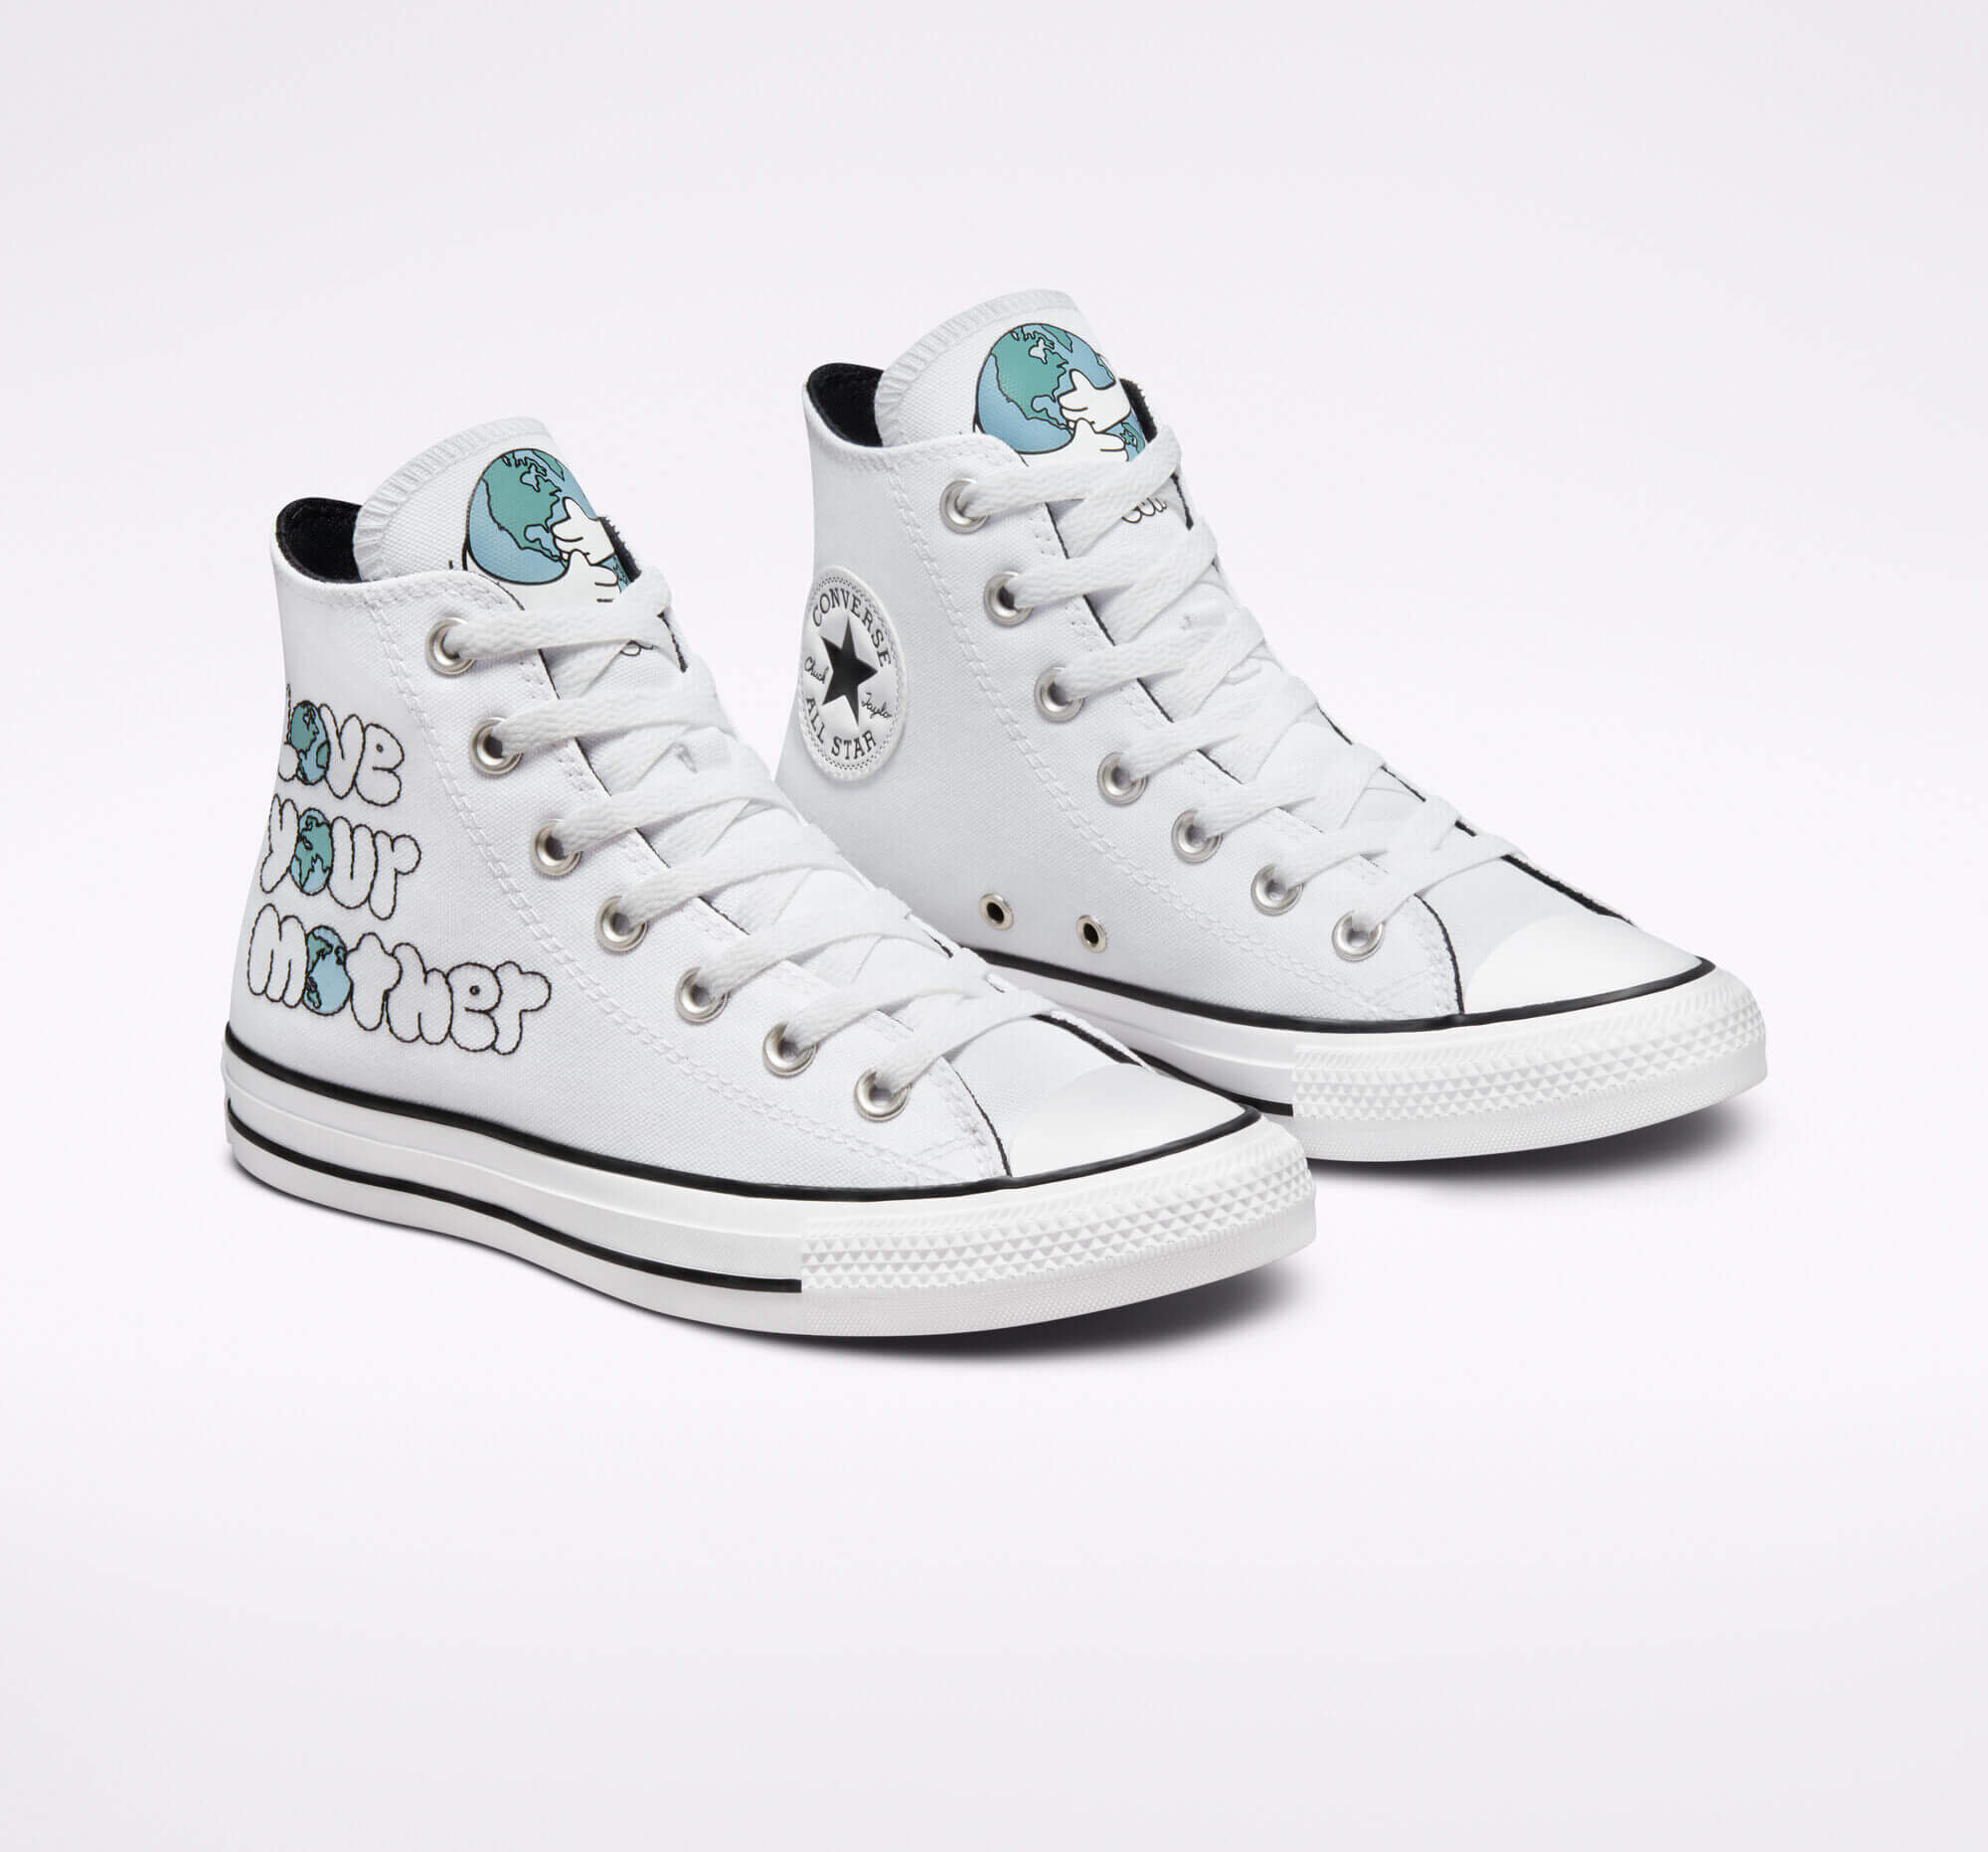 CNK-Converse-Love-Your-Mother-Collection-high-top-white.jpeg